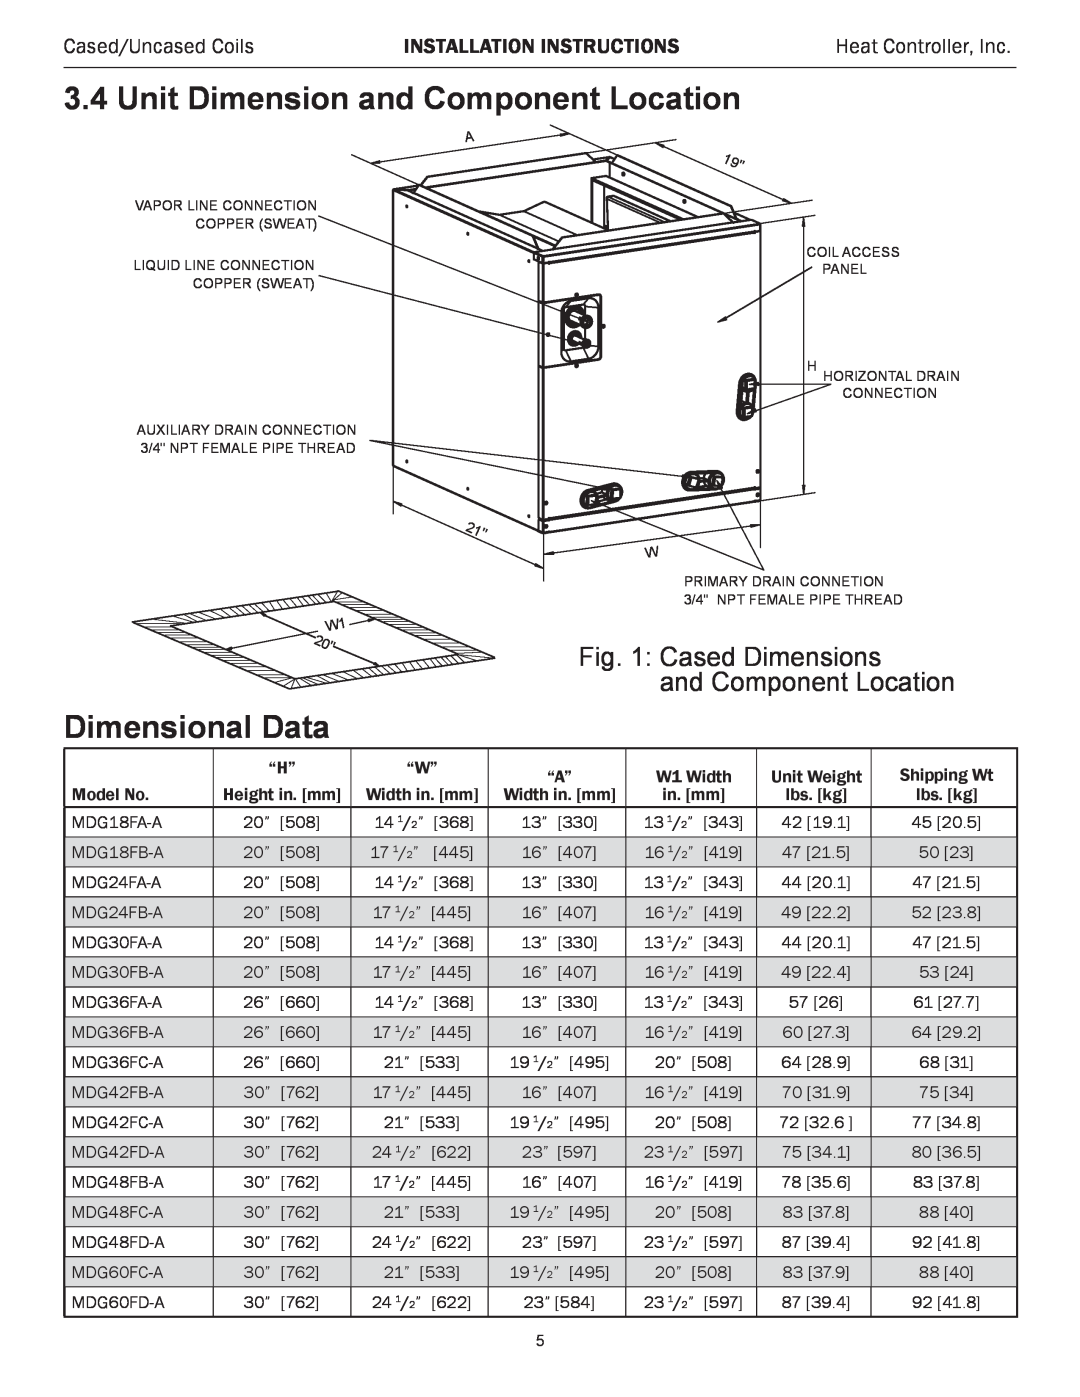 Heat Controller RSG30R-1D Unit Dimension and Component Location, Dimensional Data, Cased Dimensions and Component Location 